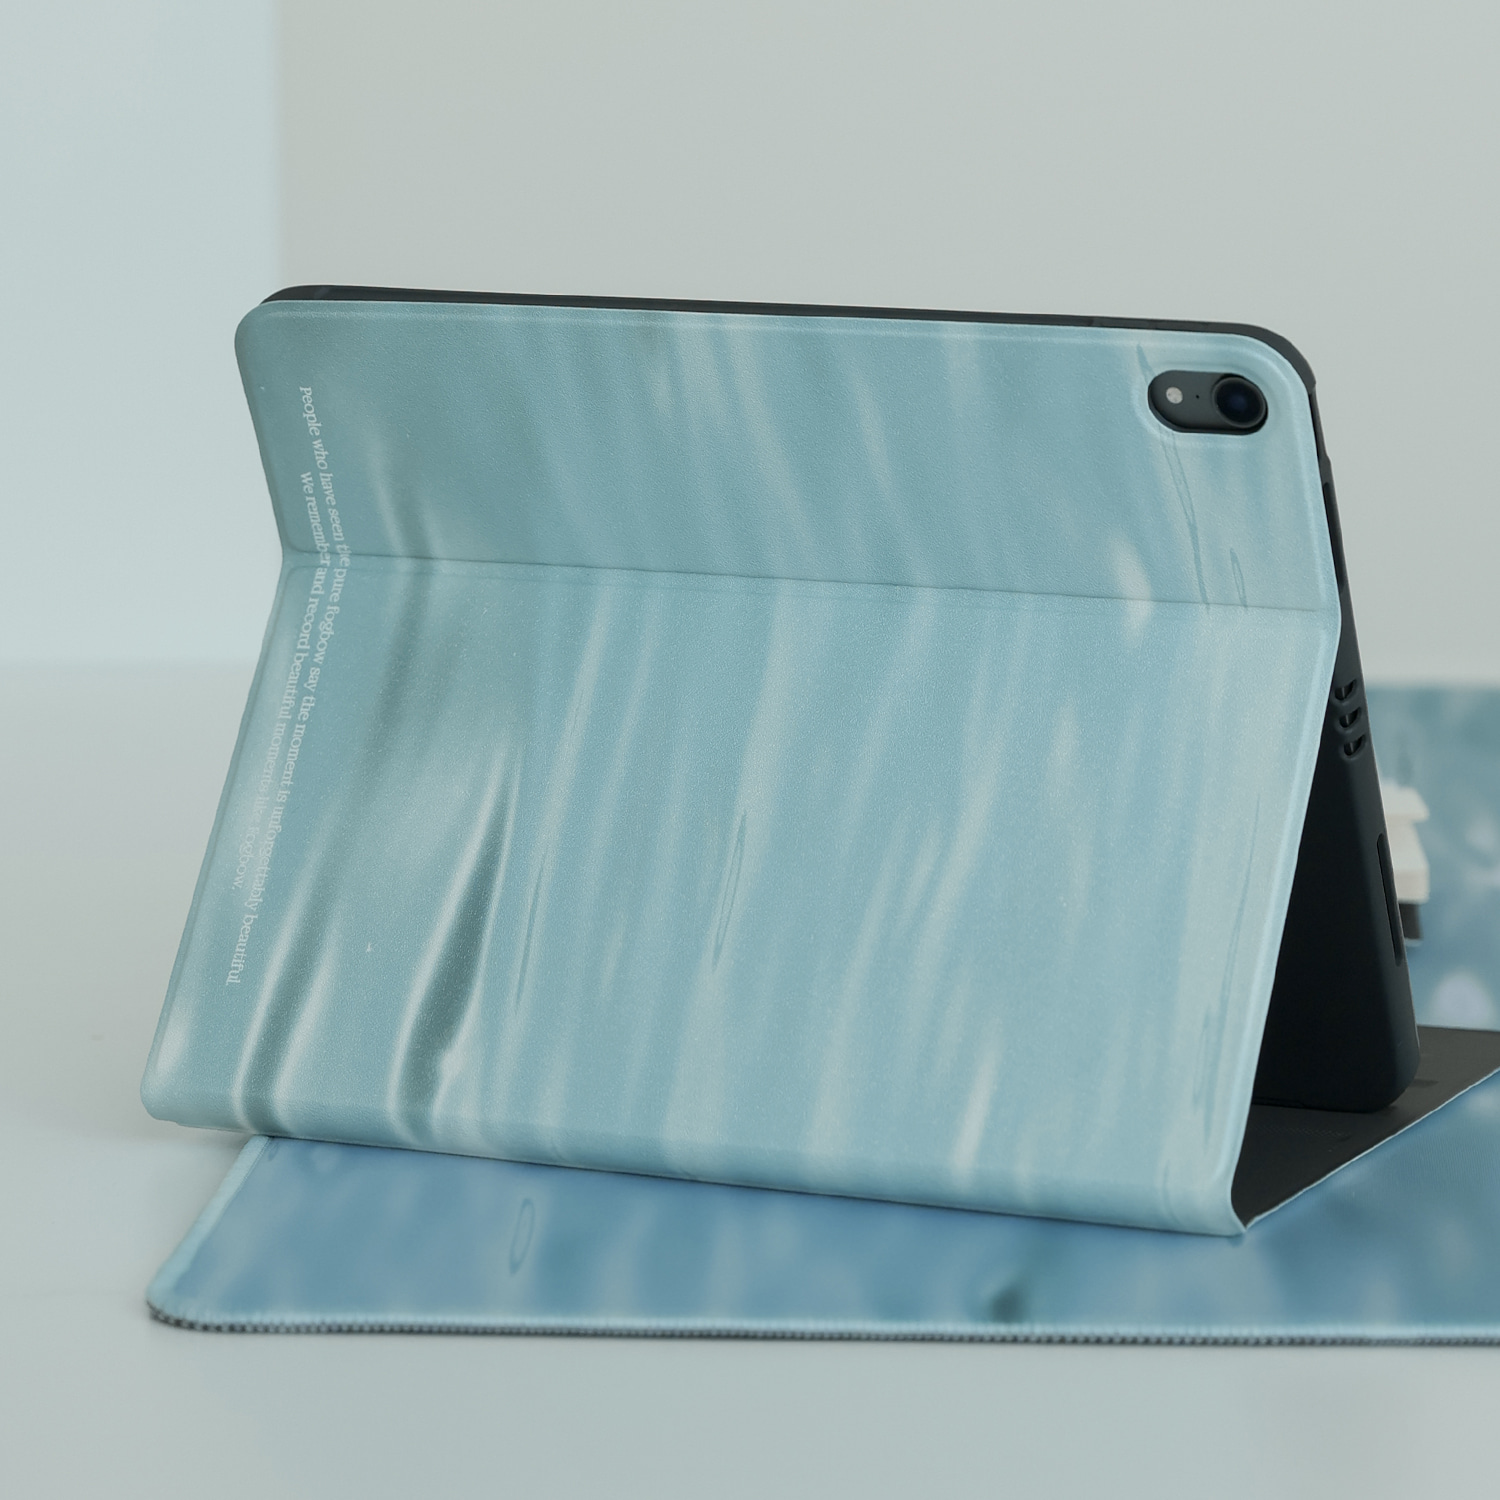 FOGBOWgleaming iPad cover case